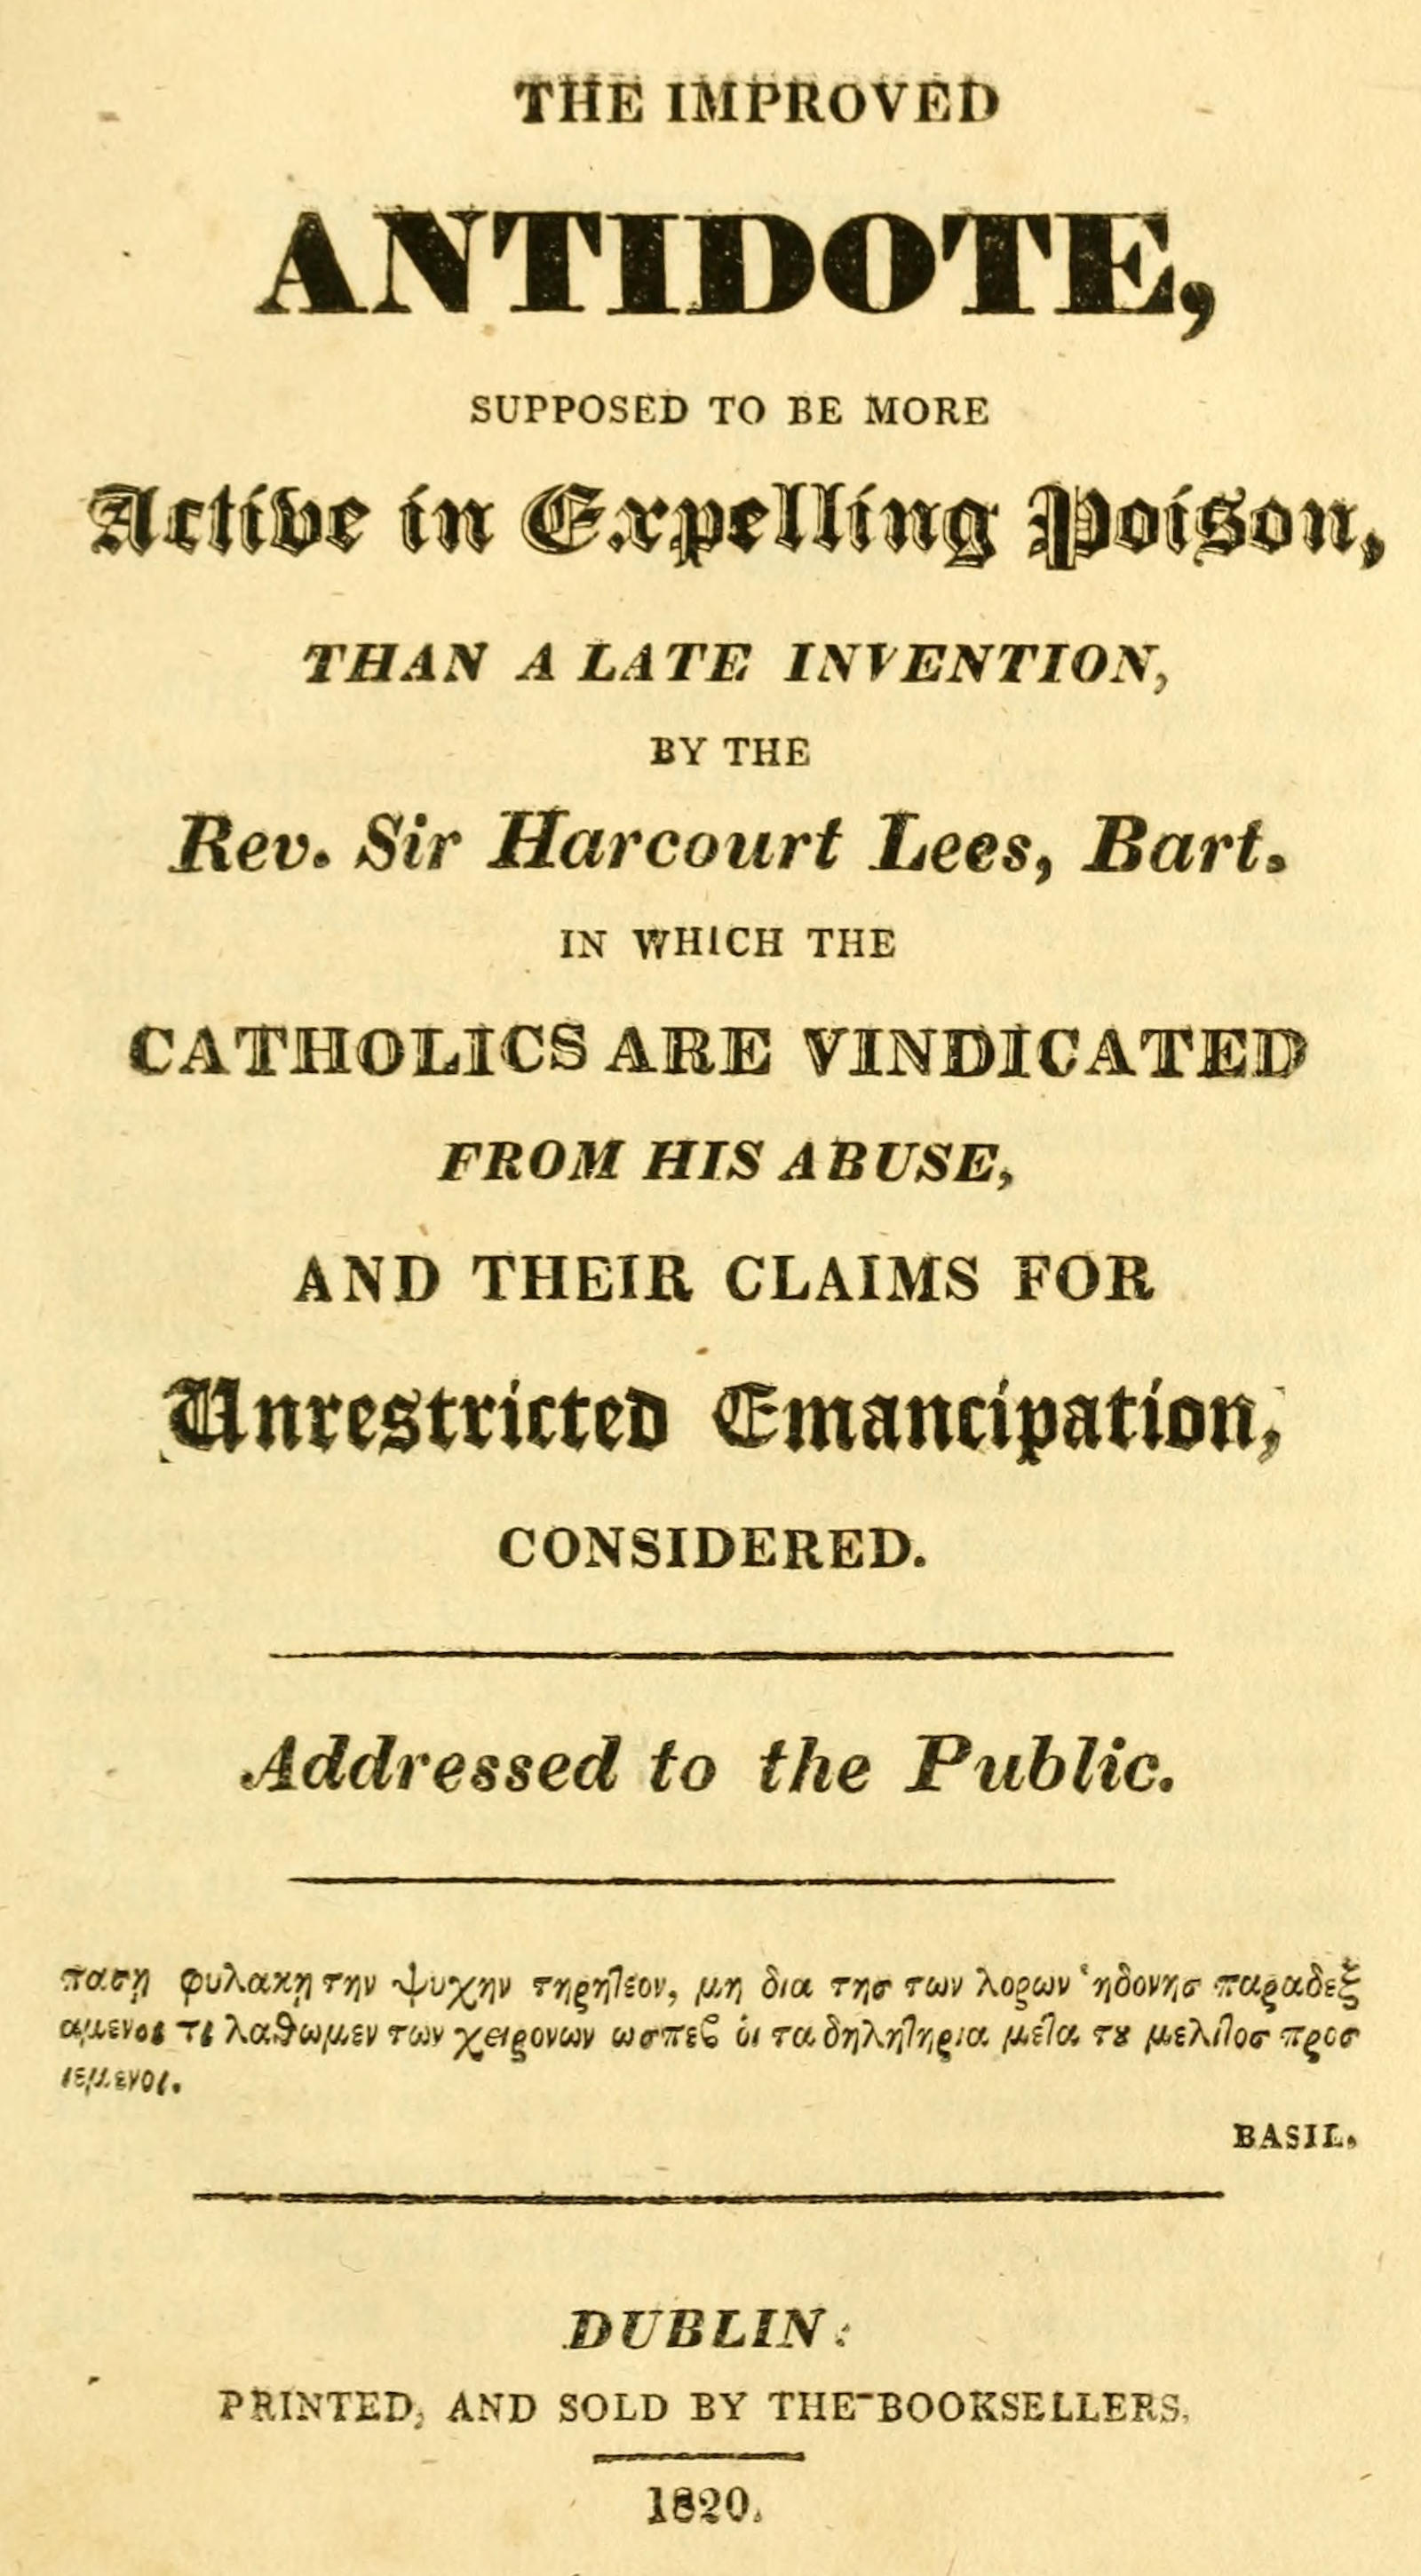 The improved antidote, supposed to be more active in expelling poison, than a late invention, by the Rev. Sir Harcourt Lees, Bart. in which the Catholics are vindicated from his abuse, and their claims for unrestricted emancipation, considered